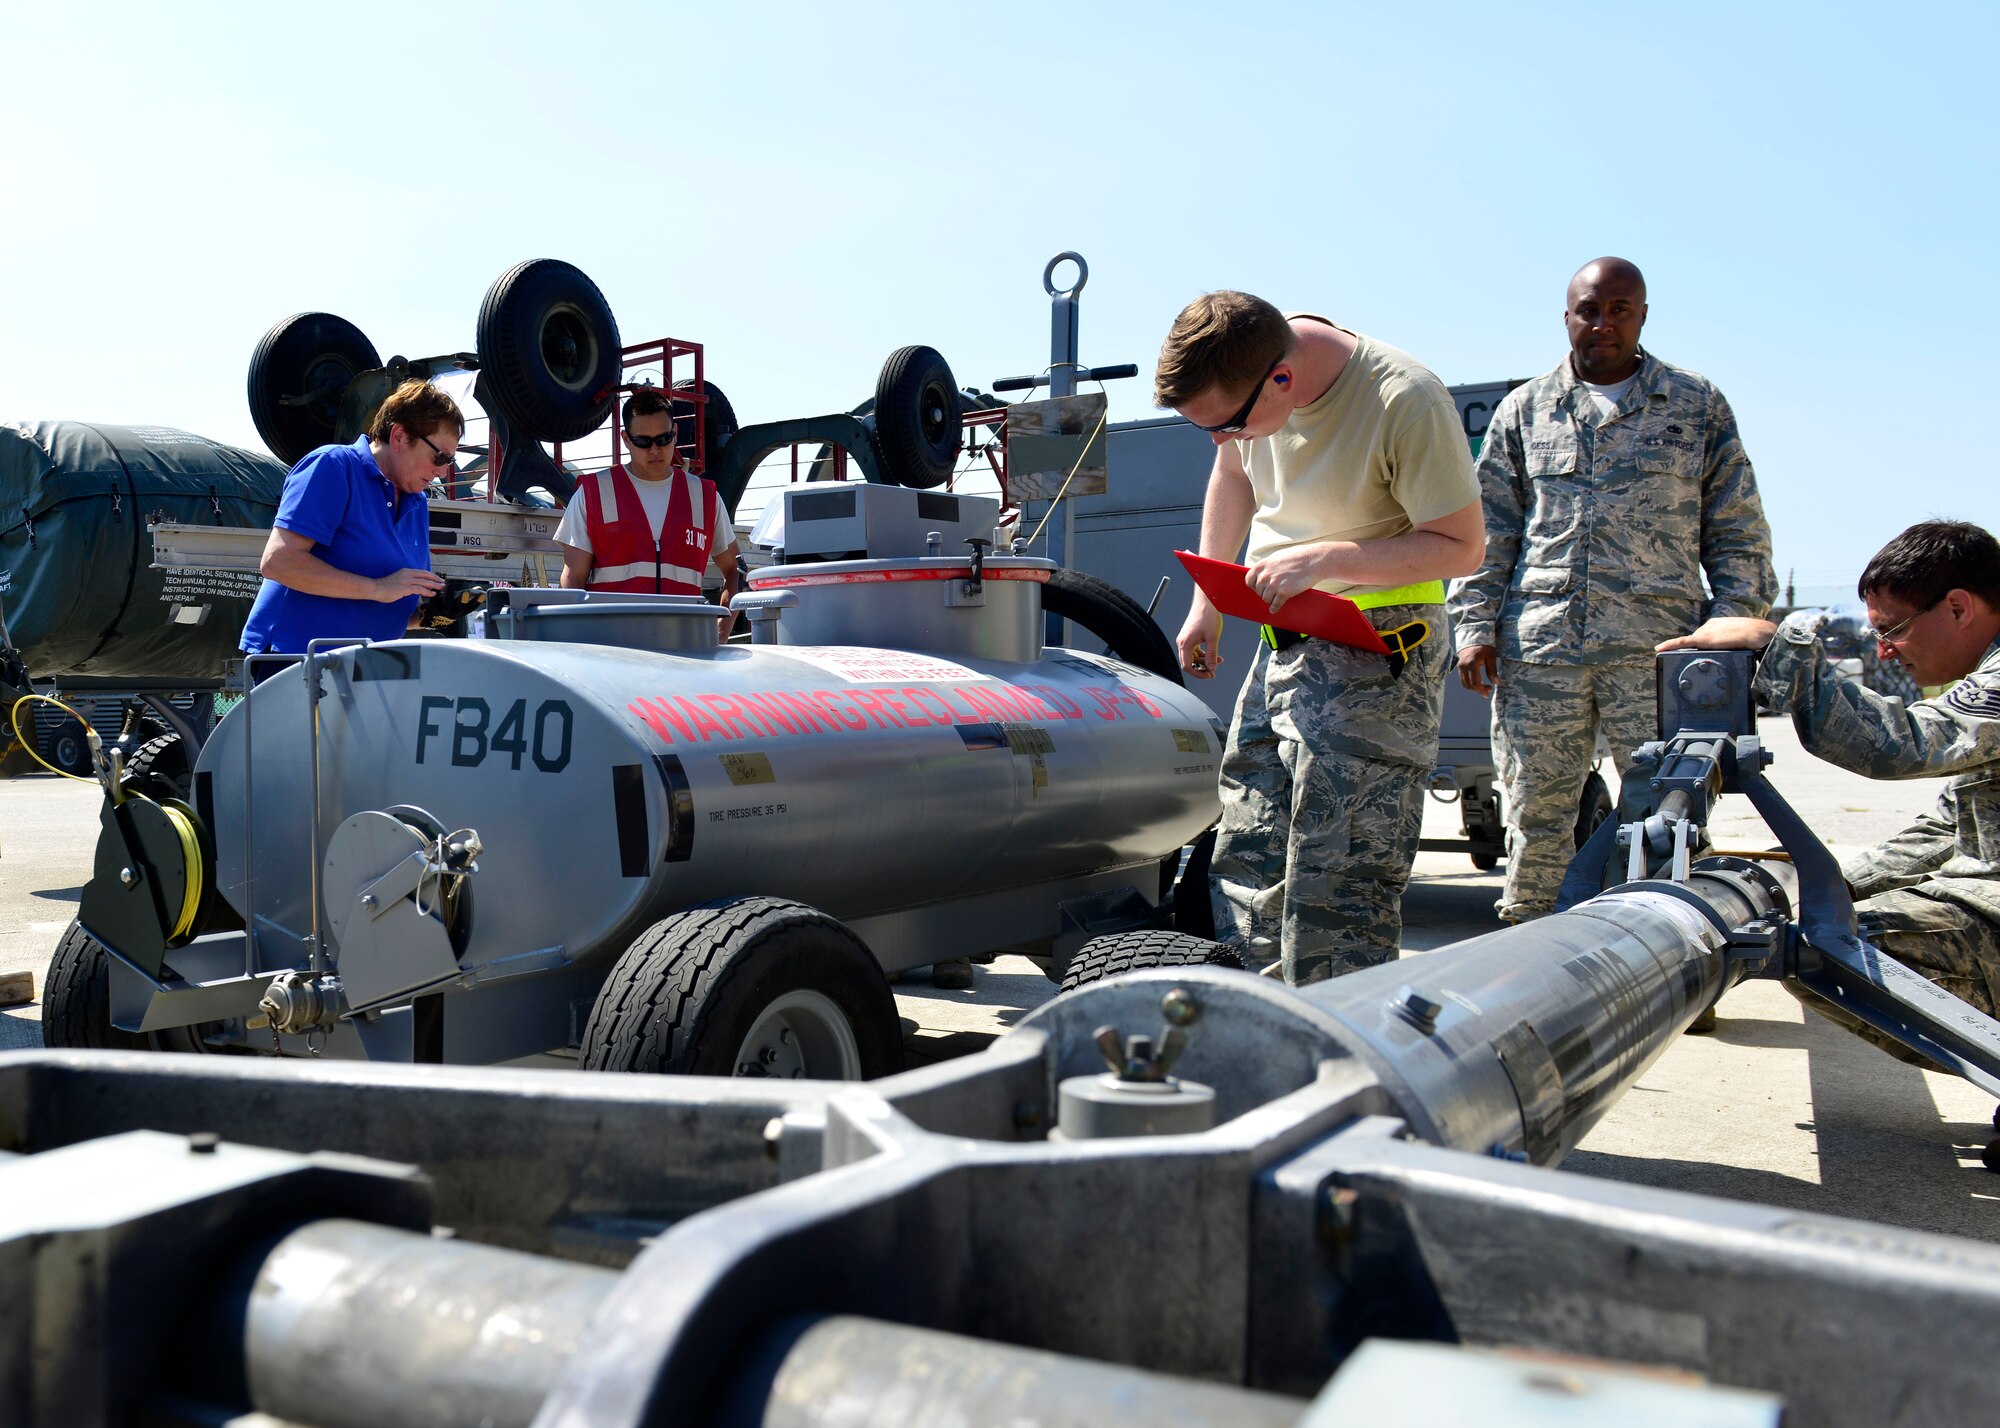 Team Aviano members inspect cargo, June 29, 2016, at Aviano Air Base, Italy, in preparation for Exercise Red Flag 16-3 at Nellis Air Force Base, Nev. Airmen from the 31st Maintenance Group, 31st Logistics Readiness Squadron and 724th Air Mobility Squadron teamed up to inspect and clear all cargo before it was flown to Nellis AFB for the exercise. (U.S. Air Force photo by Airman 1st Class Cary Smith/Released)